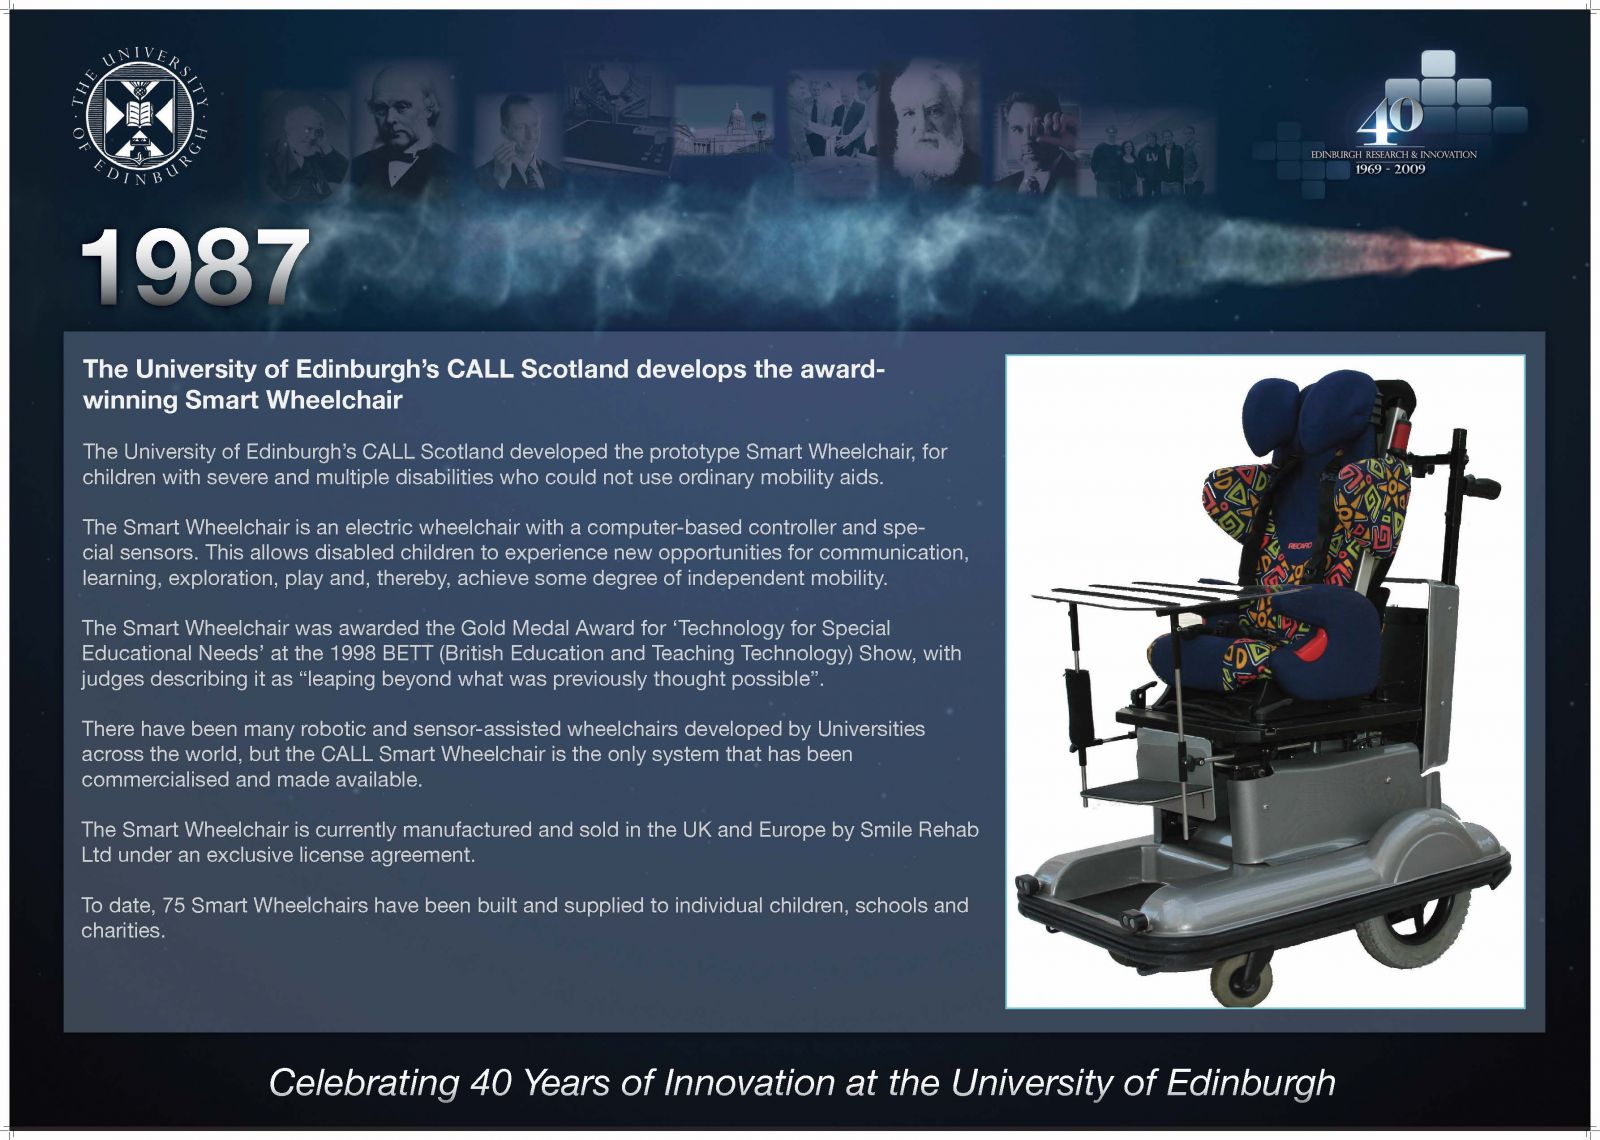 1987 The University of Edinburgh's CALL Scotland develops the award-winning Smart Wheelchair The University of Edinburgh's CALL Scotland developed the prototype Smart Wheelchair, for children with severe and multiple disabilities who could not use ordinary mobility aids. The Smart Wheelchair is an electric wheelchair with a computer-based controller and special sensors. This allows disabled children to experience new opportunities for communication, learning, exploration, play and, thereby, achieve some degree of independent mobility. The Smart Wheelchair was awarded the Gold Medal Award for 'Technology for Special Educational Needs' at the 1998 BETT (British Education and Teaching Technology) Show, with judges describing it as "leaping beyond what was previously thought possible". There have been many robotic and sensor-assisted wheelchairs developed by Universities across the world, but the CALL Smart Wheelchair is the only system that has been commercialised and made available. The Smart Wheelchair is currently manufactured and sold in the UK and Europe by Smile Rehab Ltd under an exclusive license agreement. To date, 75 Smart Wheelchairs have been built and supplied to individual children, schools and charities. 